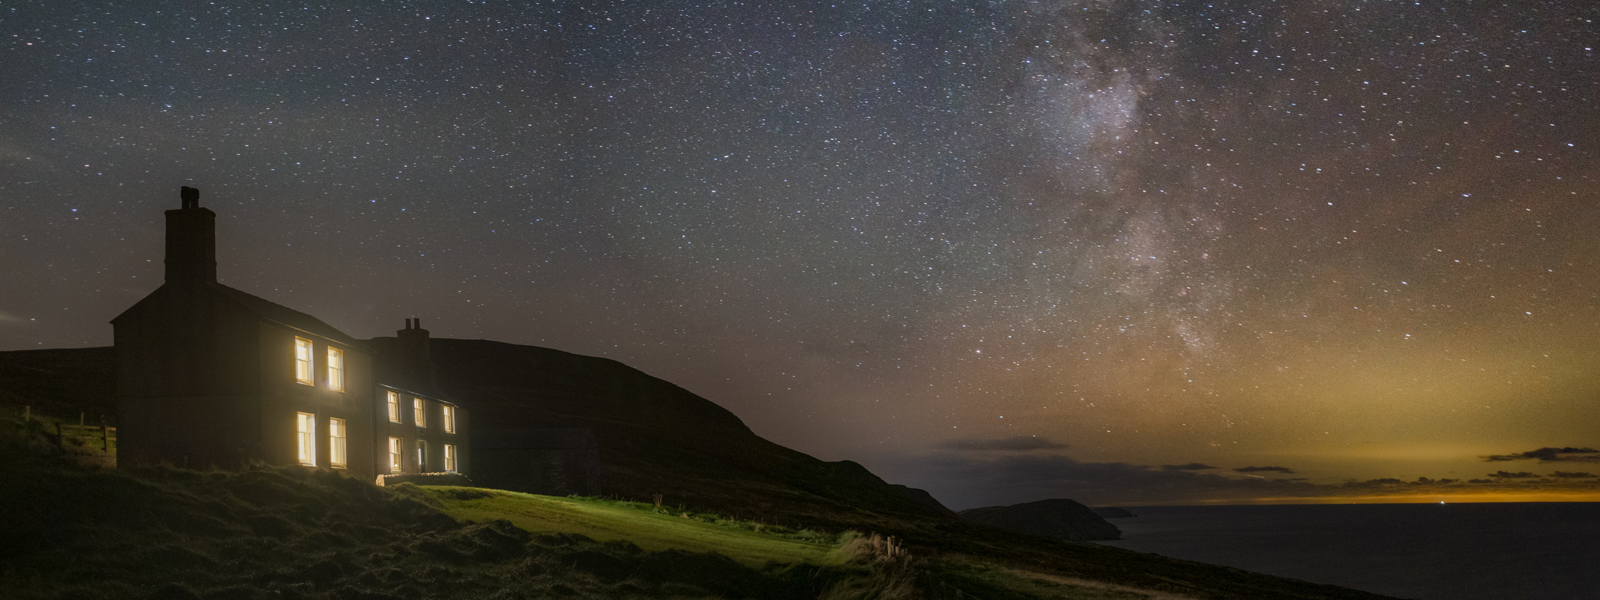 Eary Cushlin at night time, under a starry sky on the Isle of Man